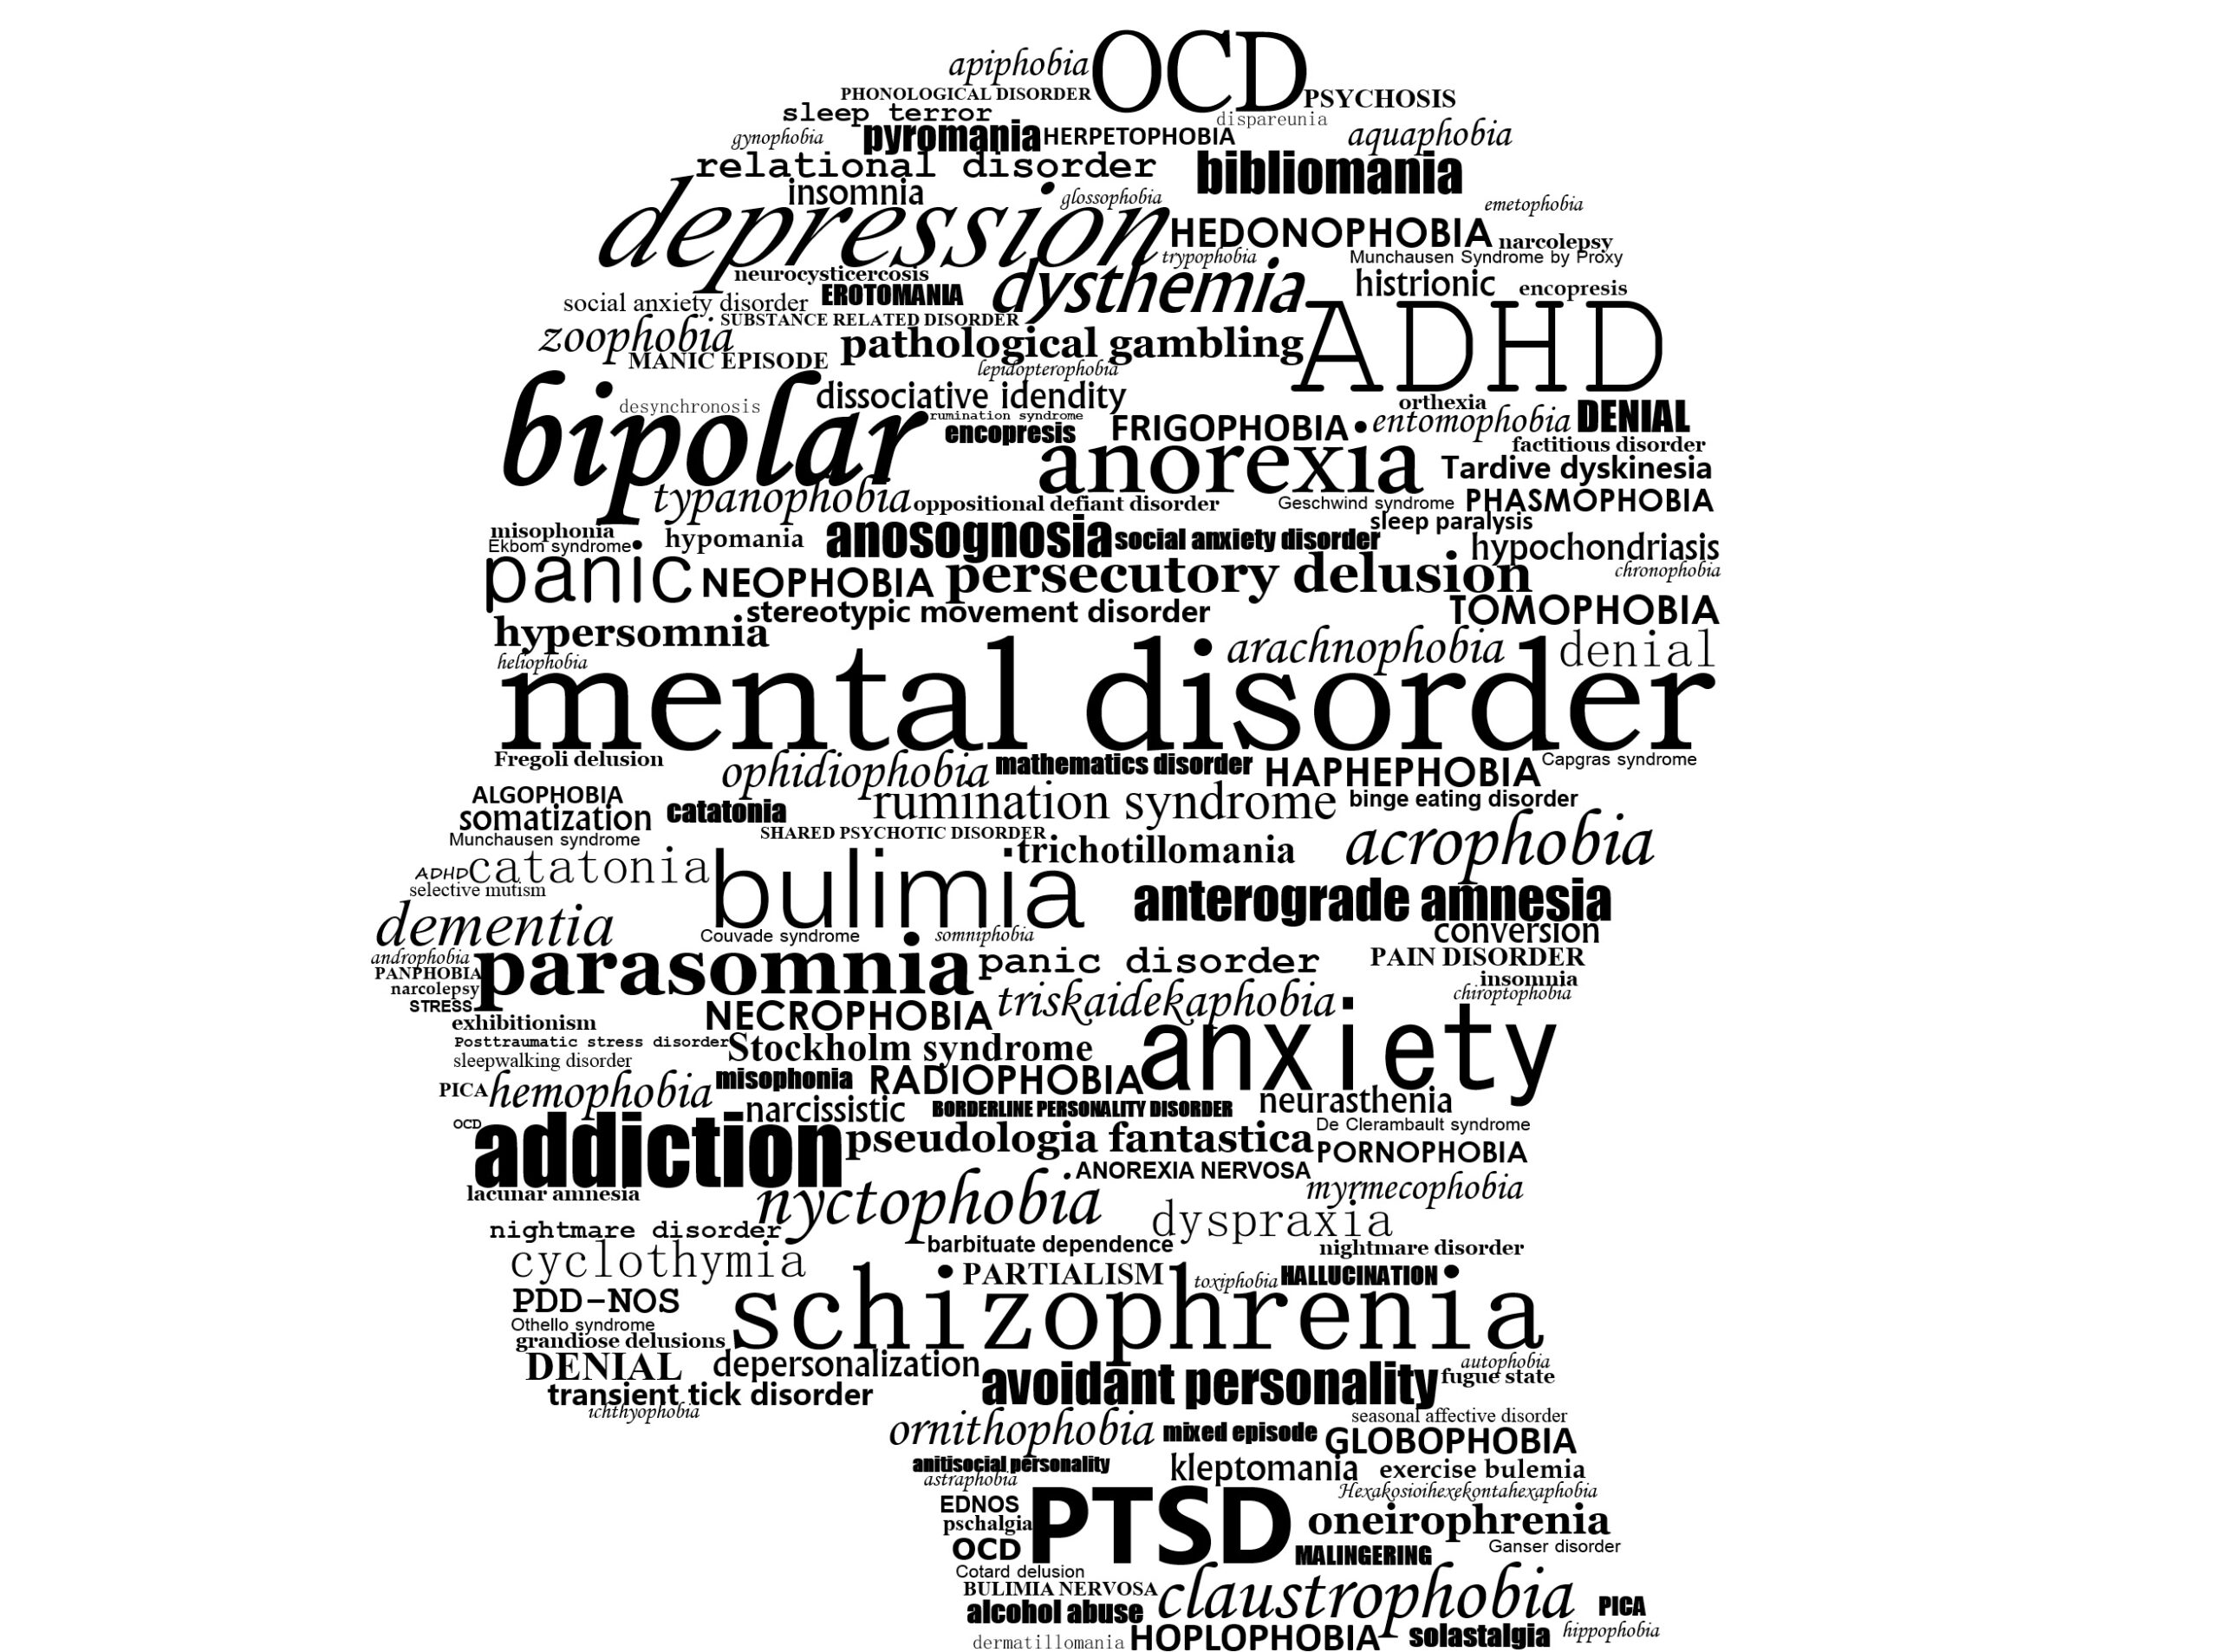 Disorders That Often Co-occur with BPD